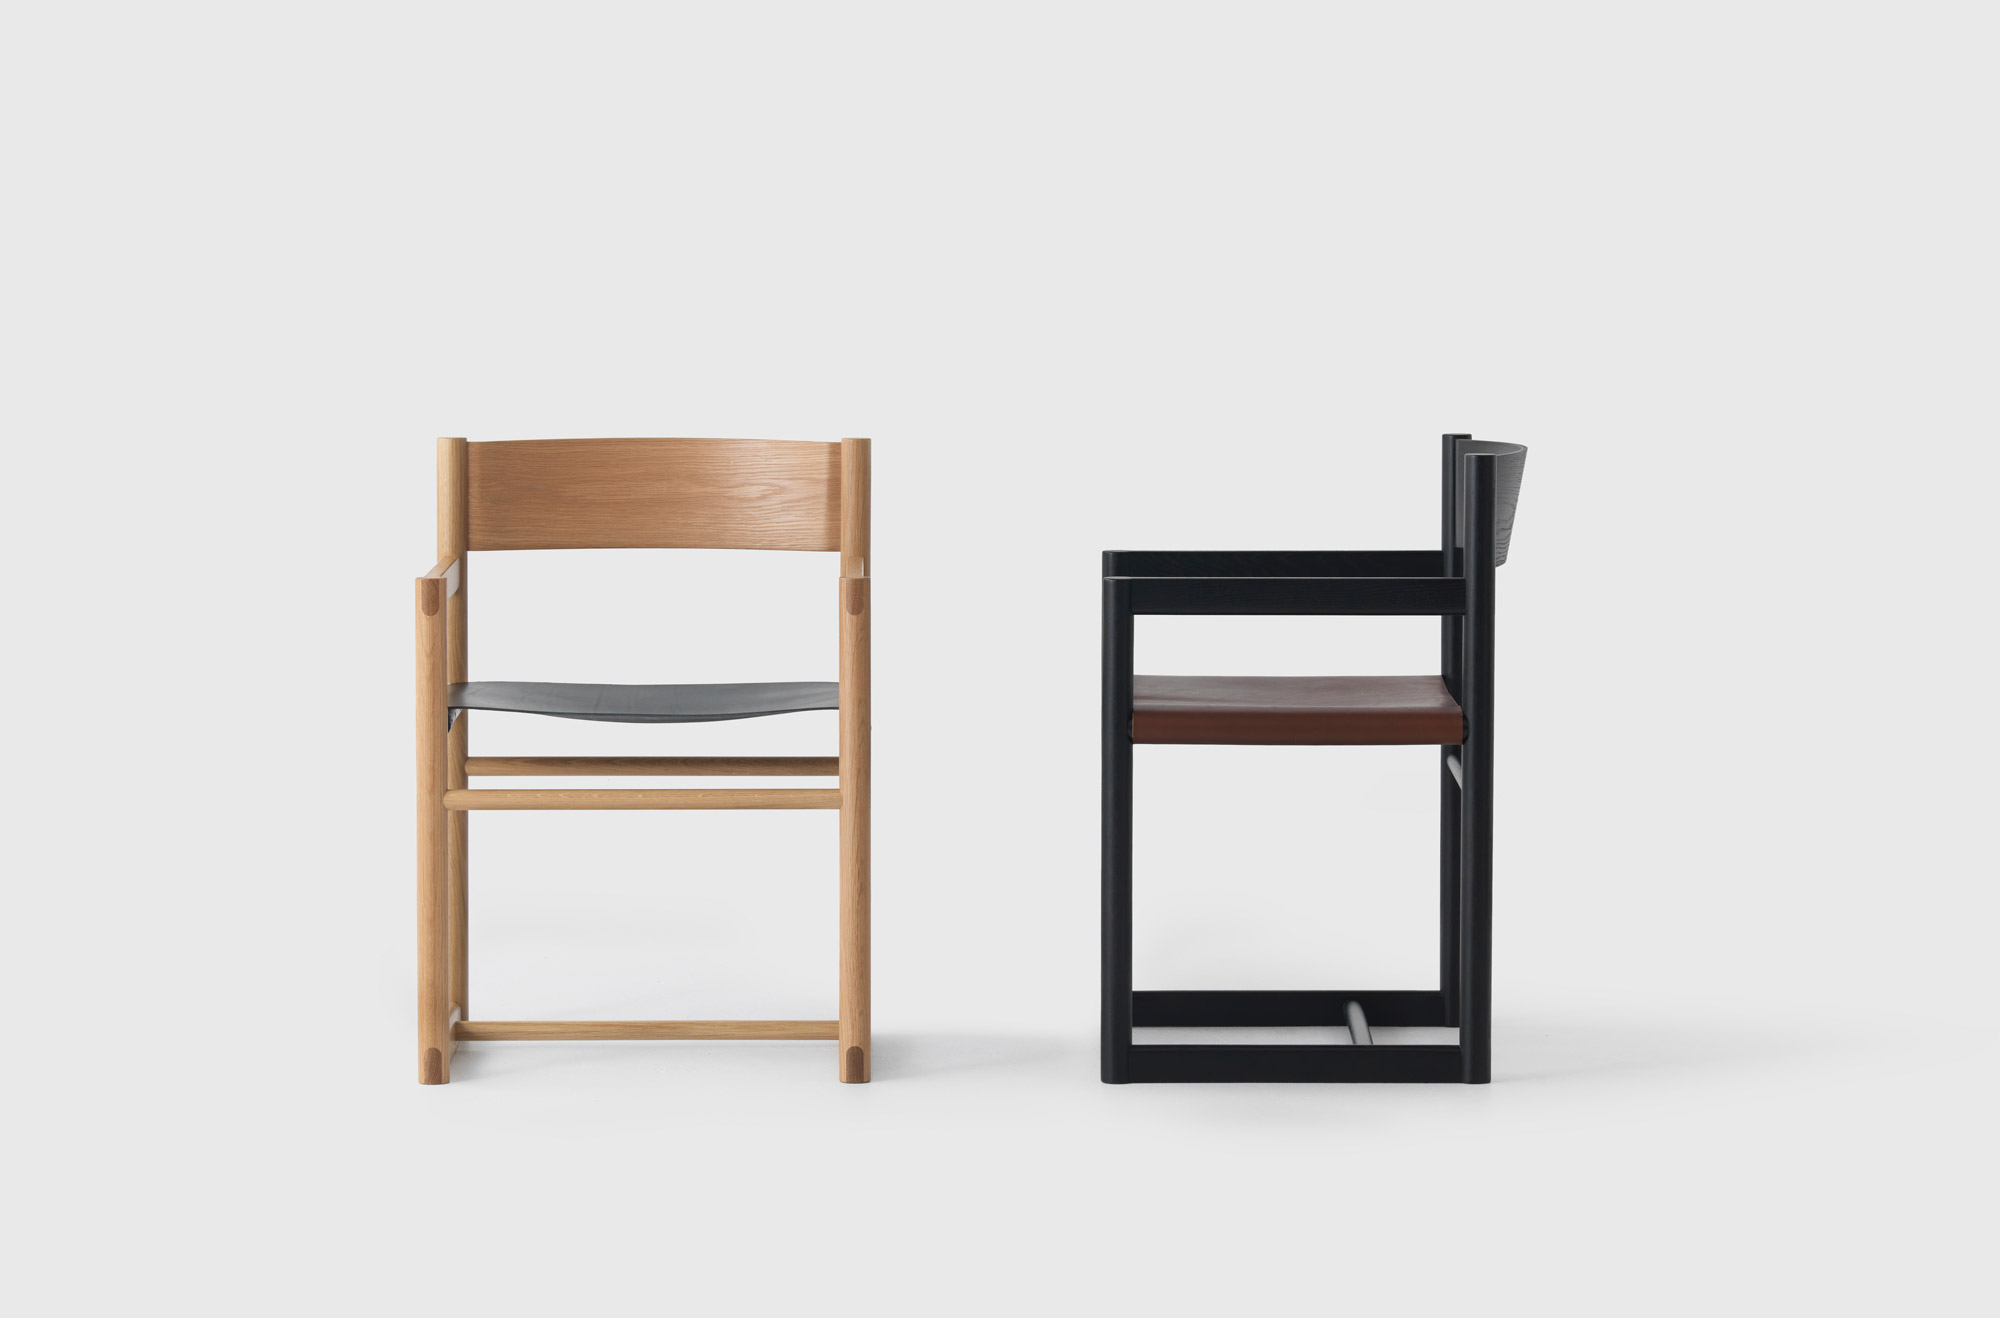 Two Minimalist Chairs designed by Simon James